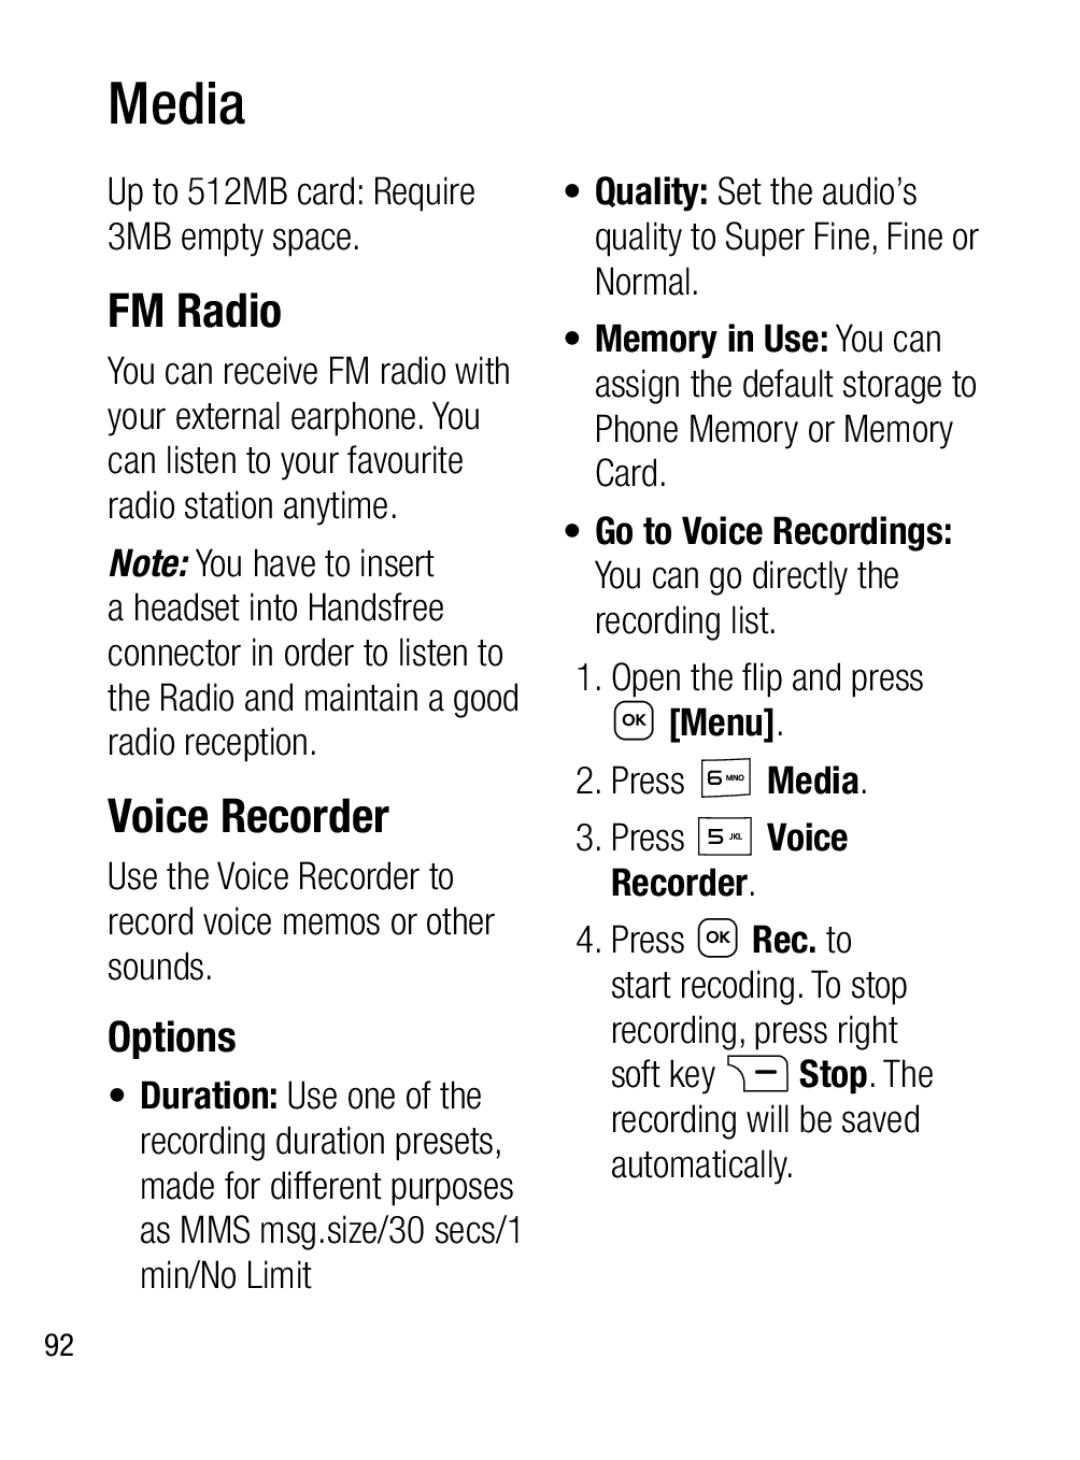 LG Electronics A133CH manual FM Radio, Options, Use the Voice Recorder to record voice memos or other sounds, Media 